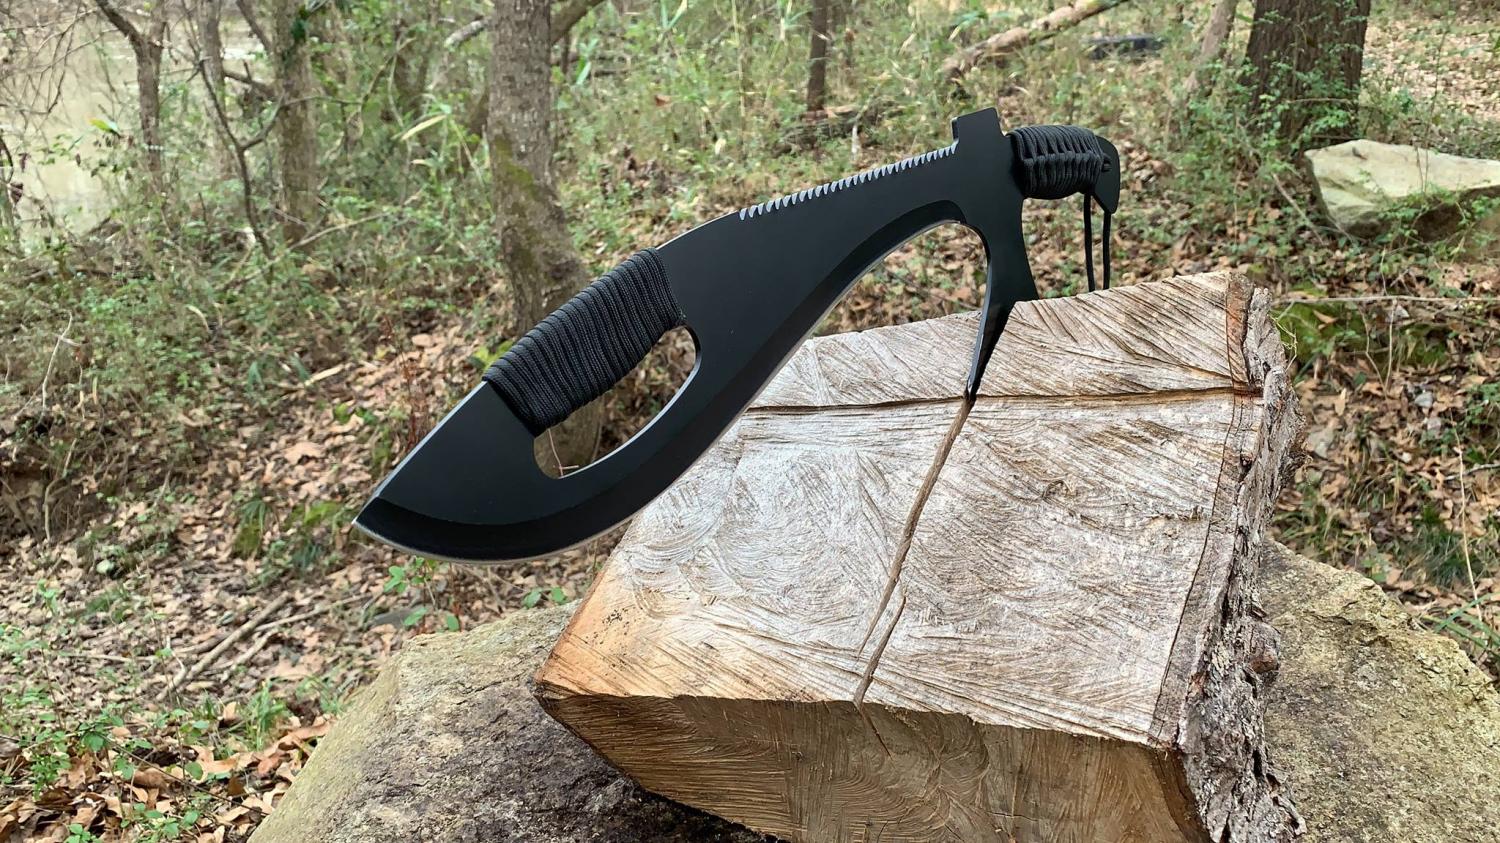 Omniblade 3-in-1 Survival Machete Includes a Knife, Tactical Tomahawk, and a Survival Saw - Giant machete multi-tool